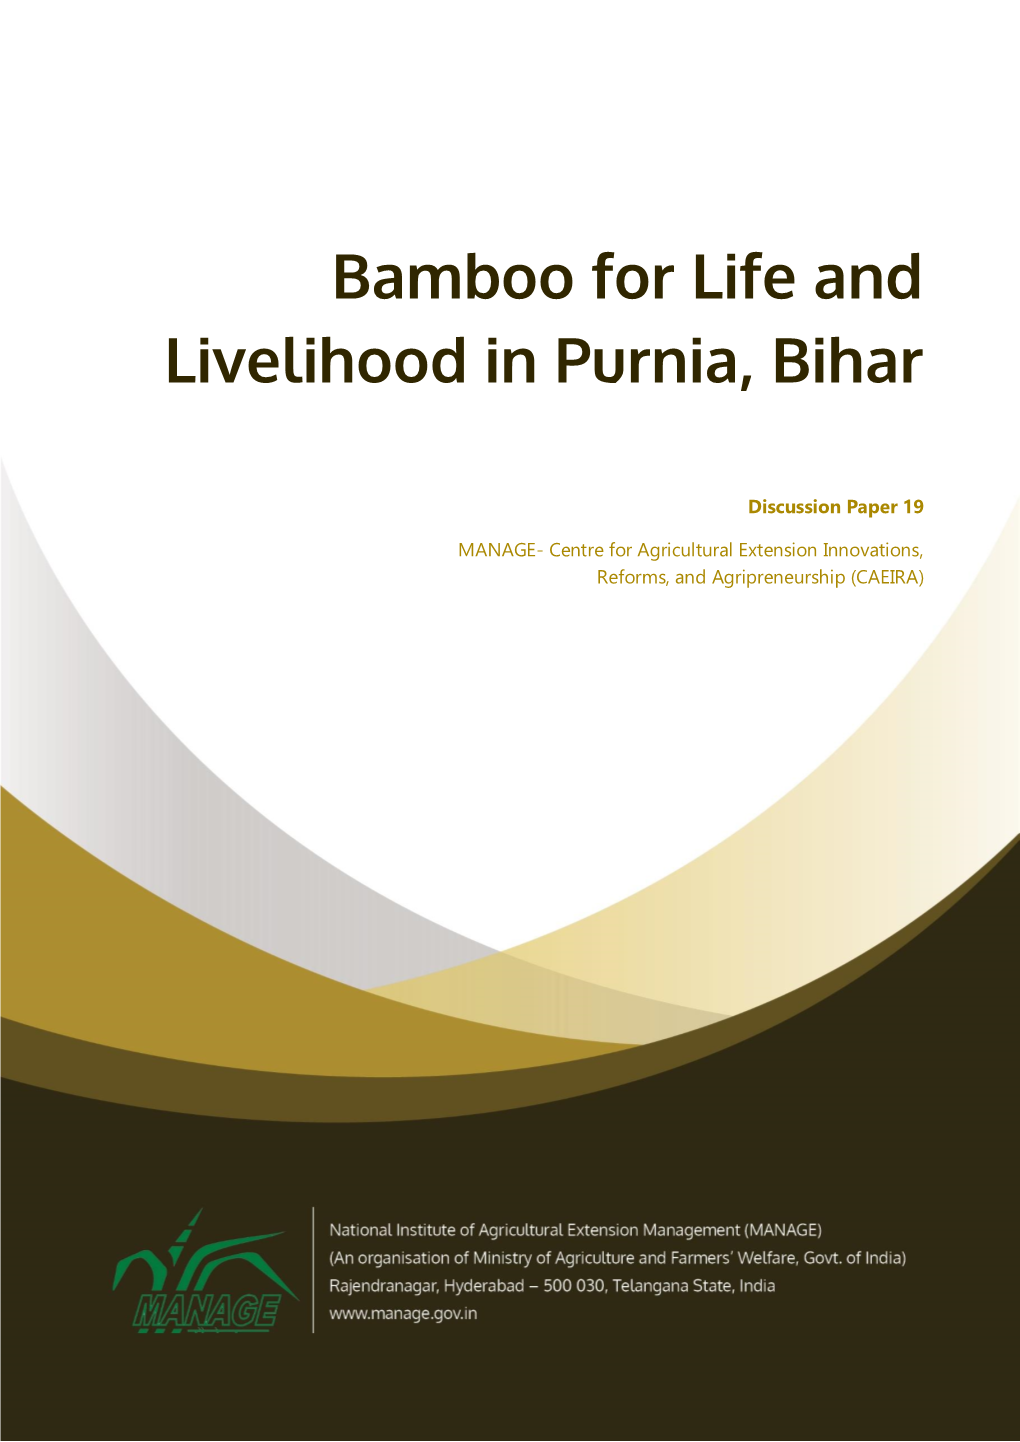 Discussion Paper 19: Bamboo for Life and Livelihood in Purnia, Bihar